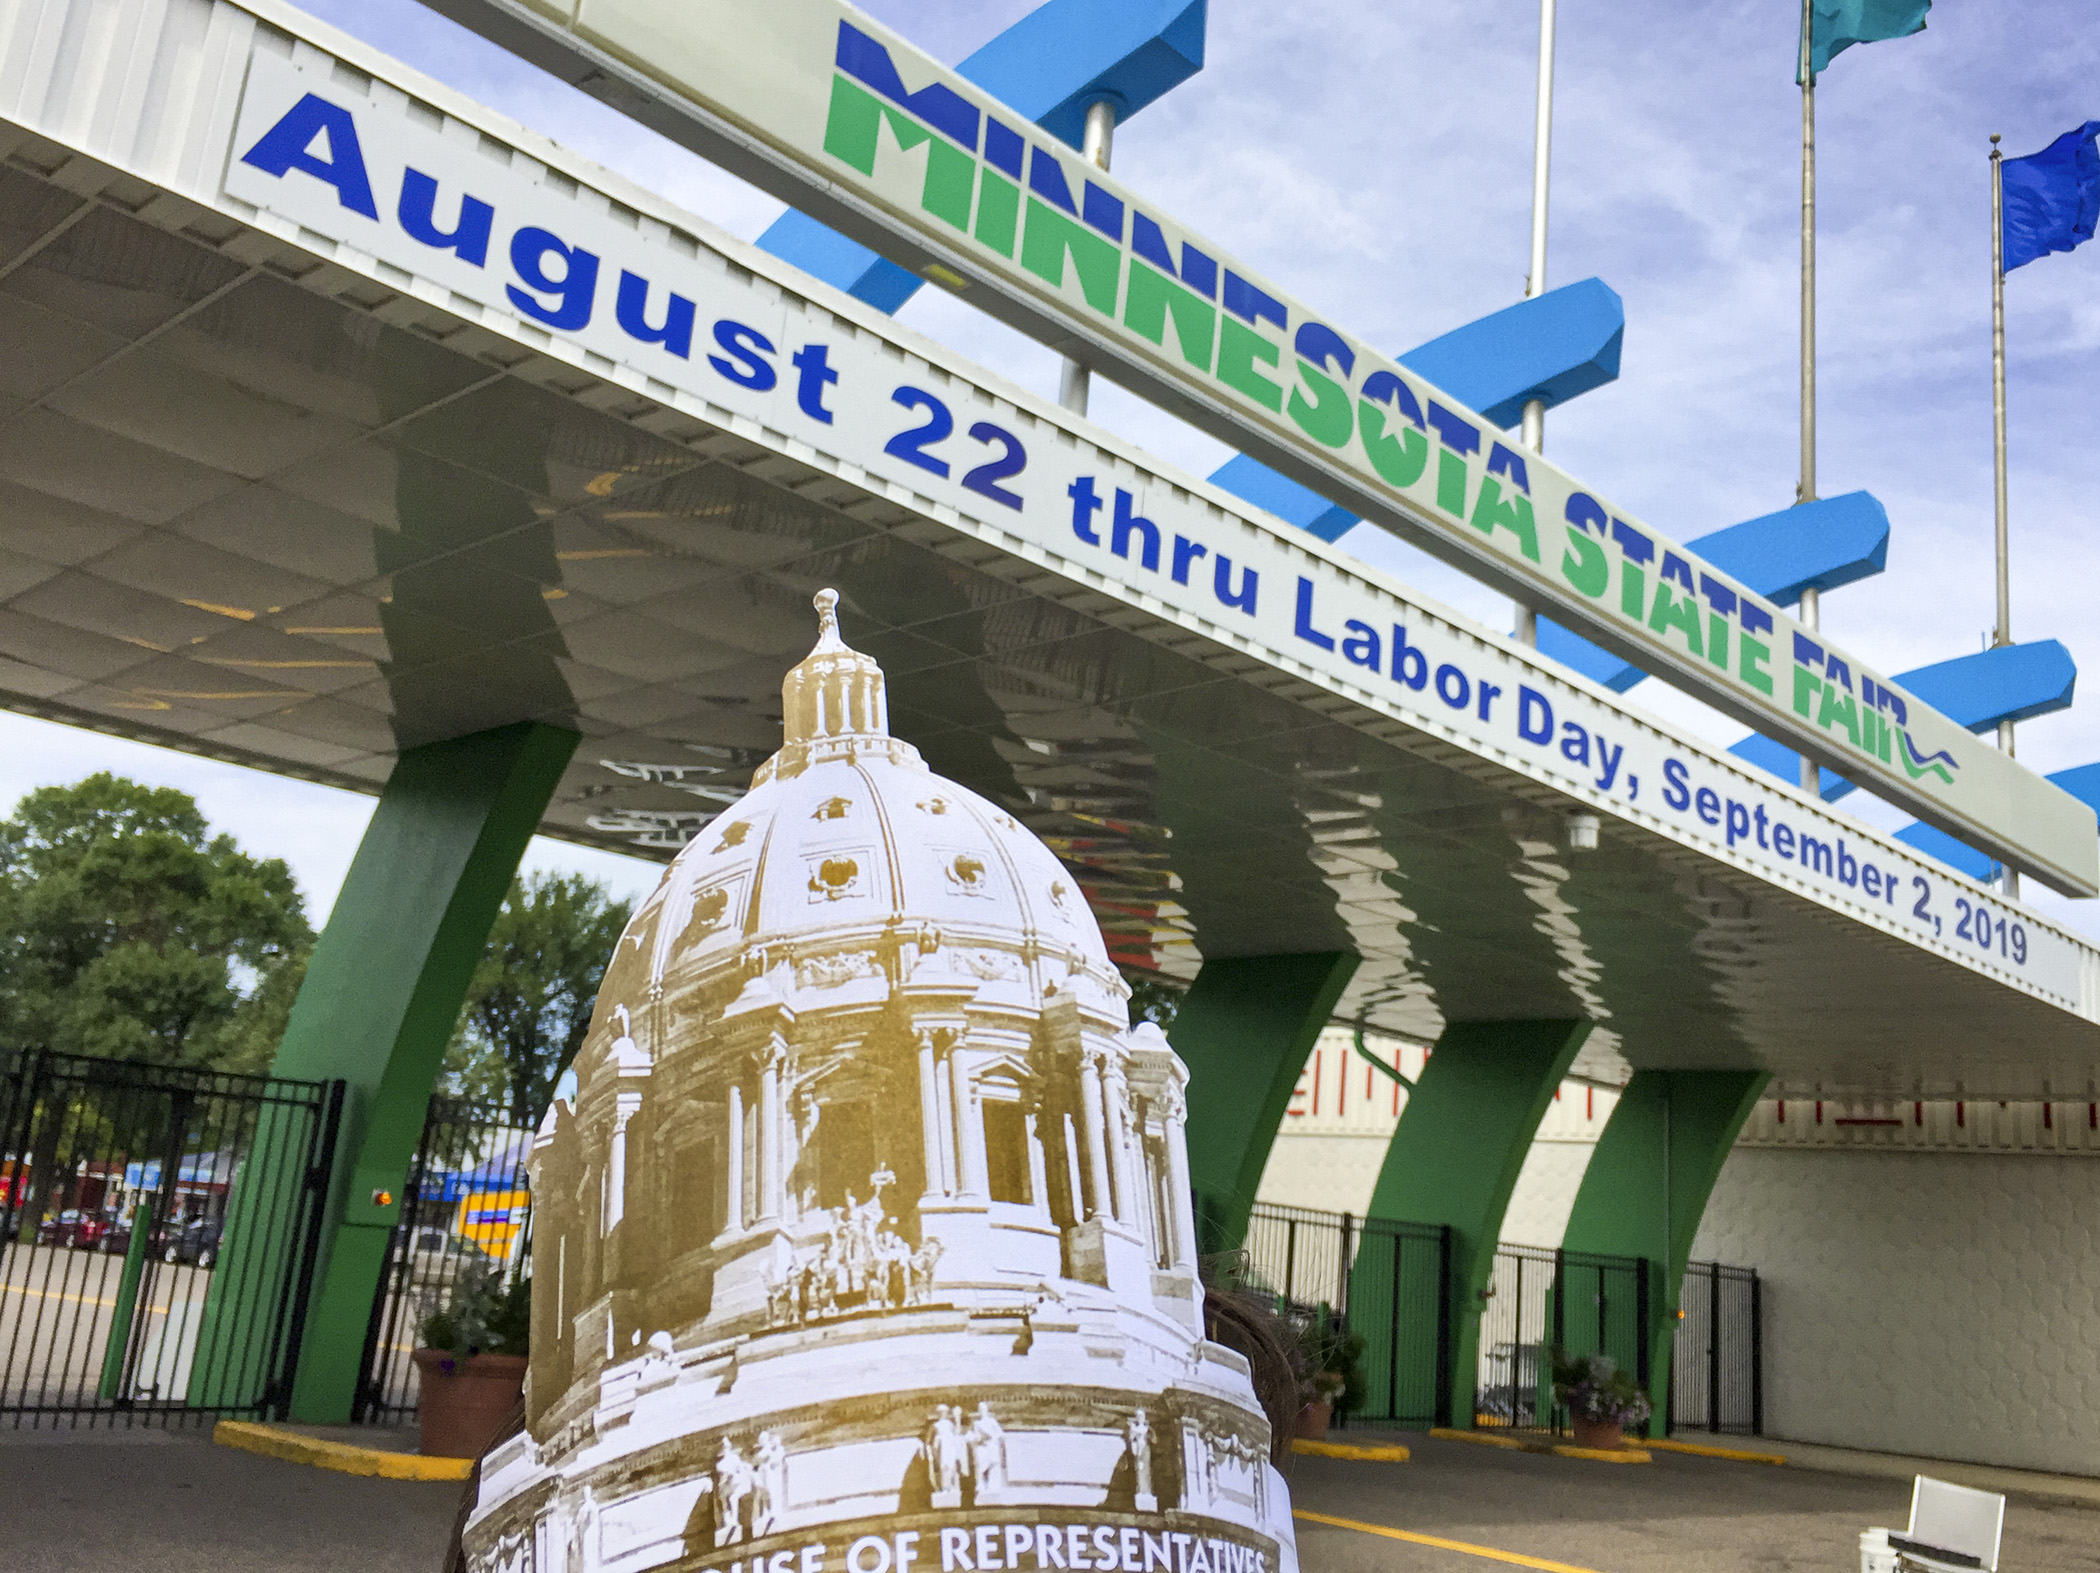 The popular Capitol hats will again be available at the House of Representatives booth at the Great Minnesota Get-Together.